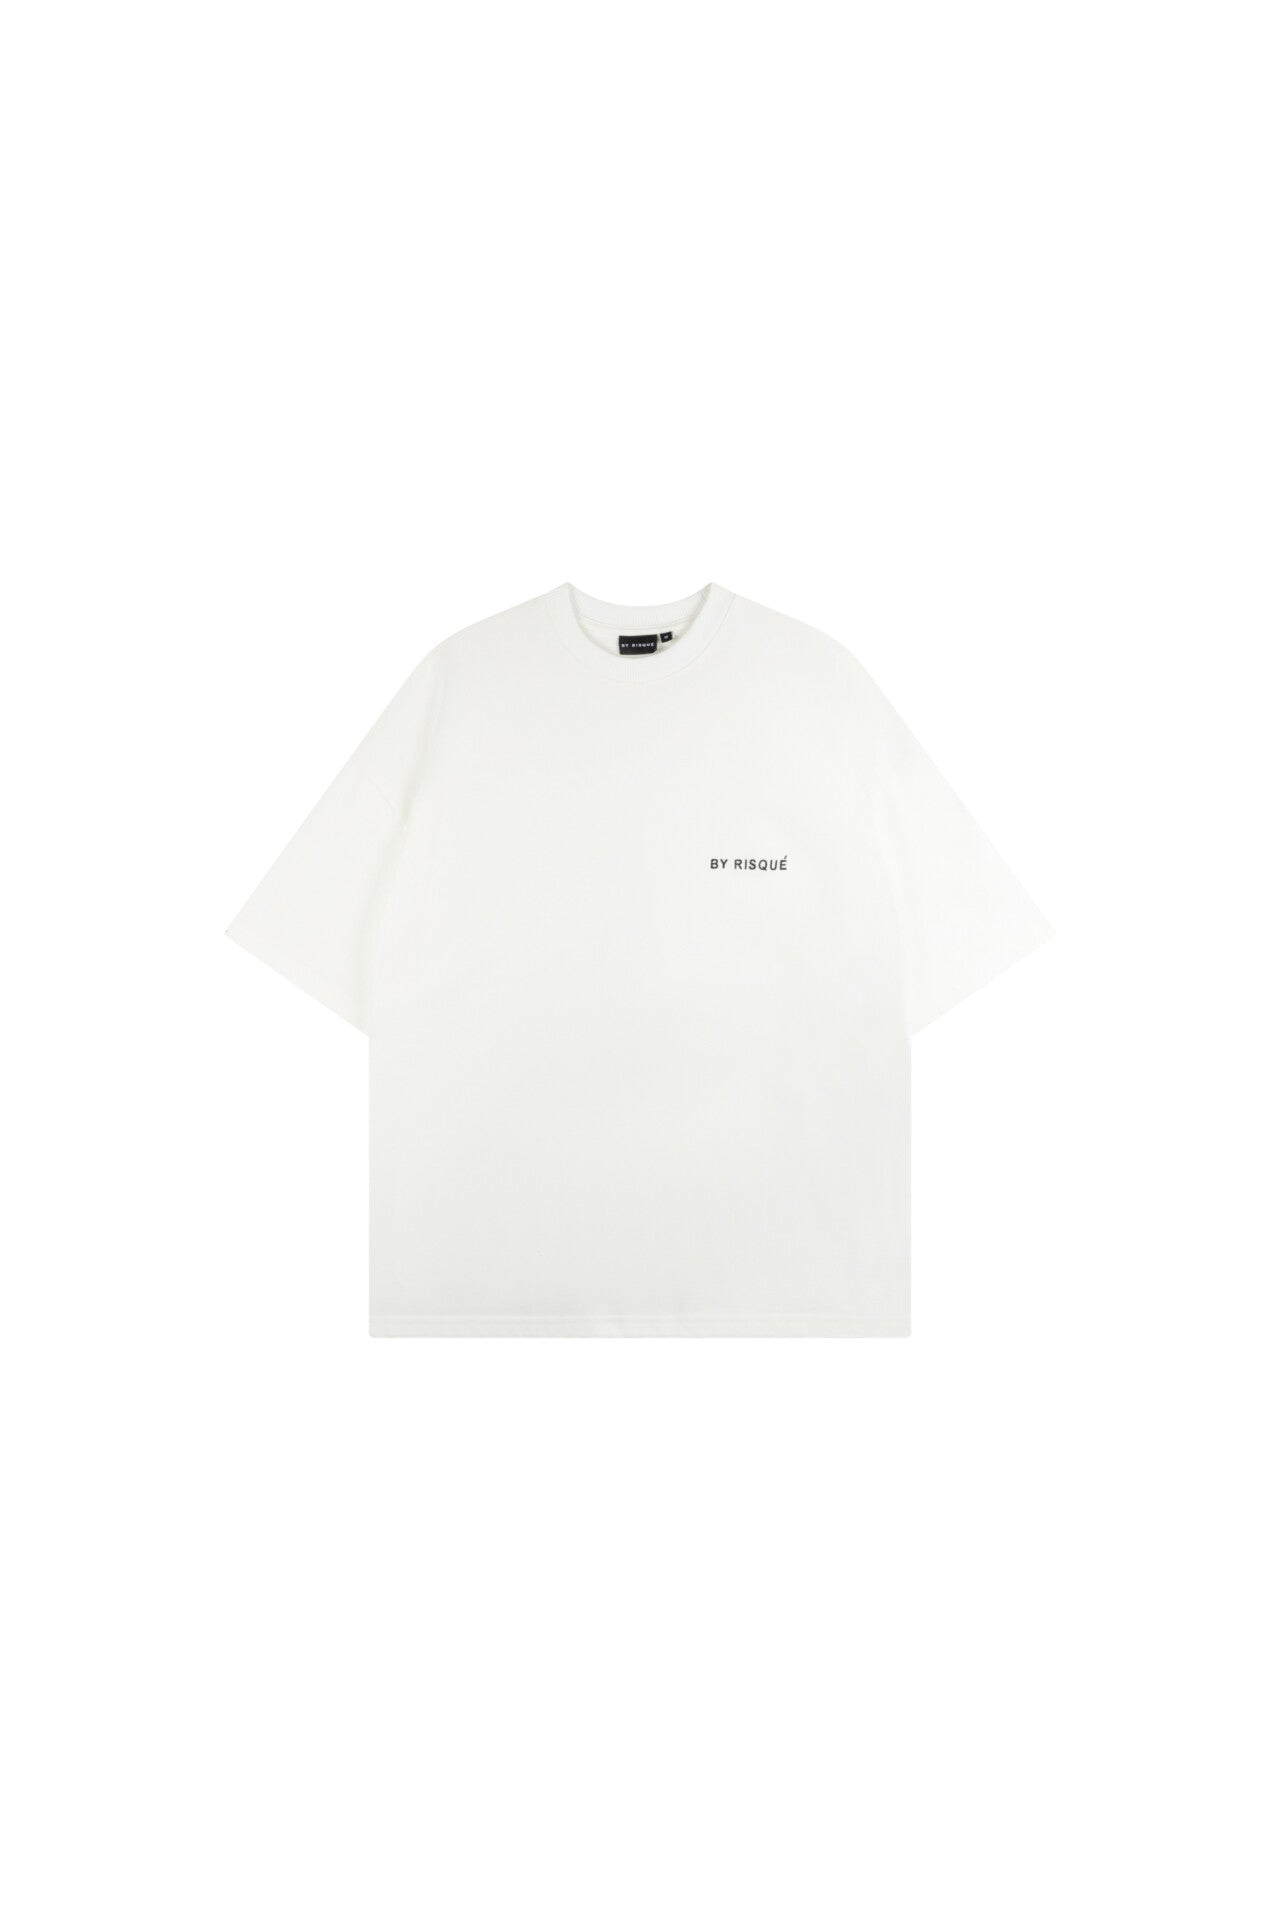 BY RISQUÉ Heavy Tee White